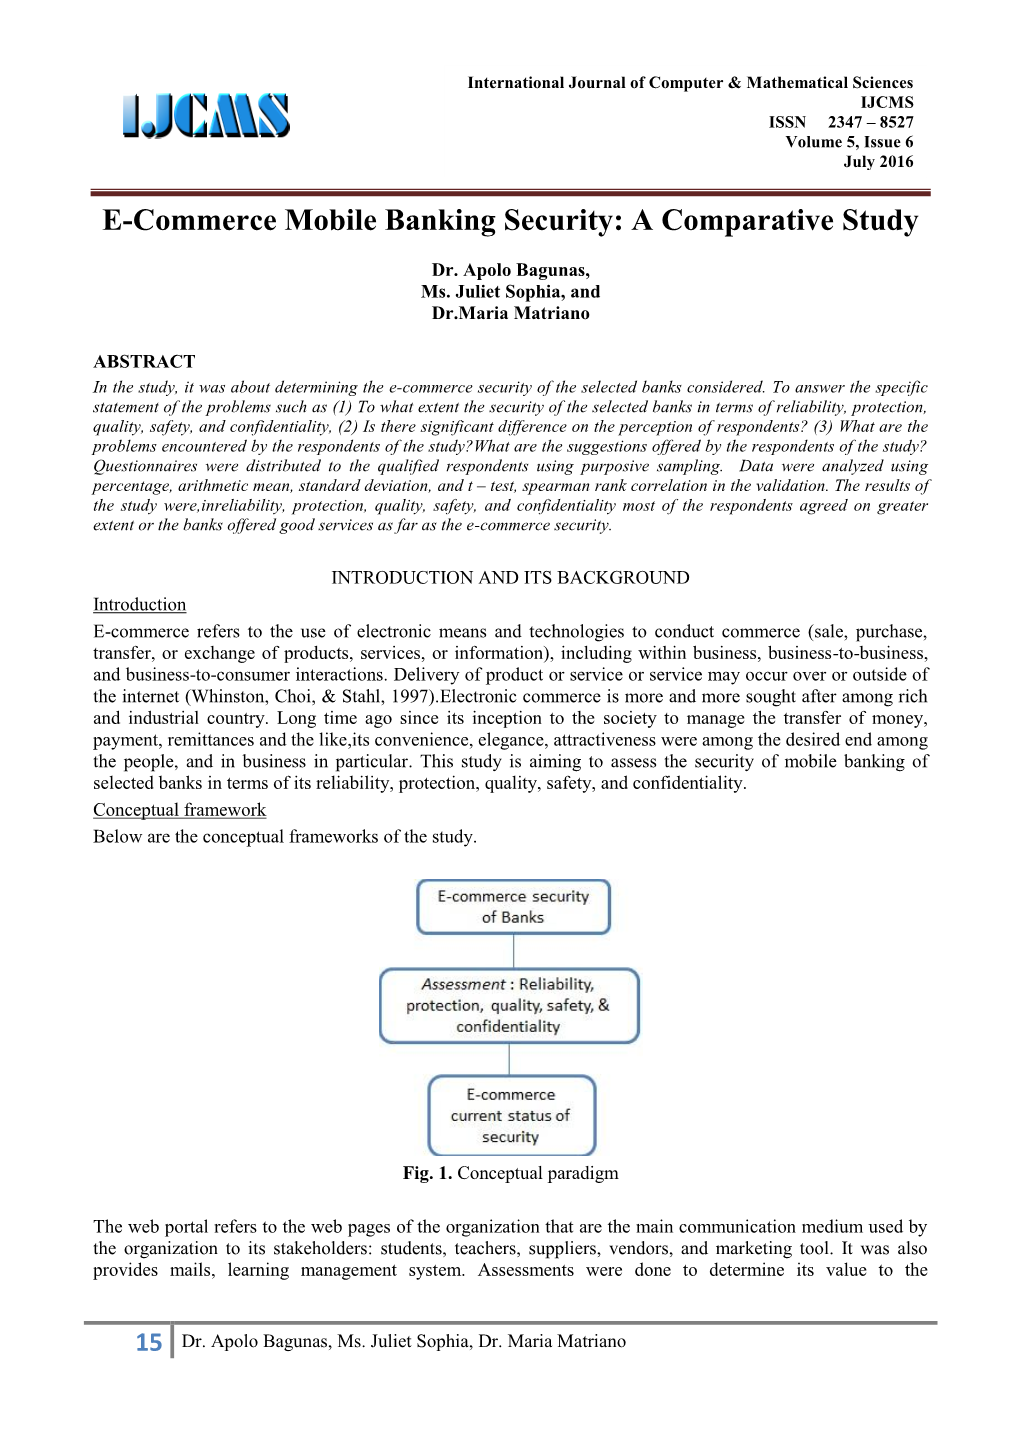 E-Commerce Mobile Banking Security: a Comparative Study